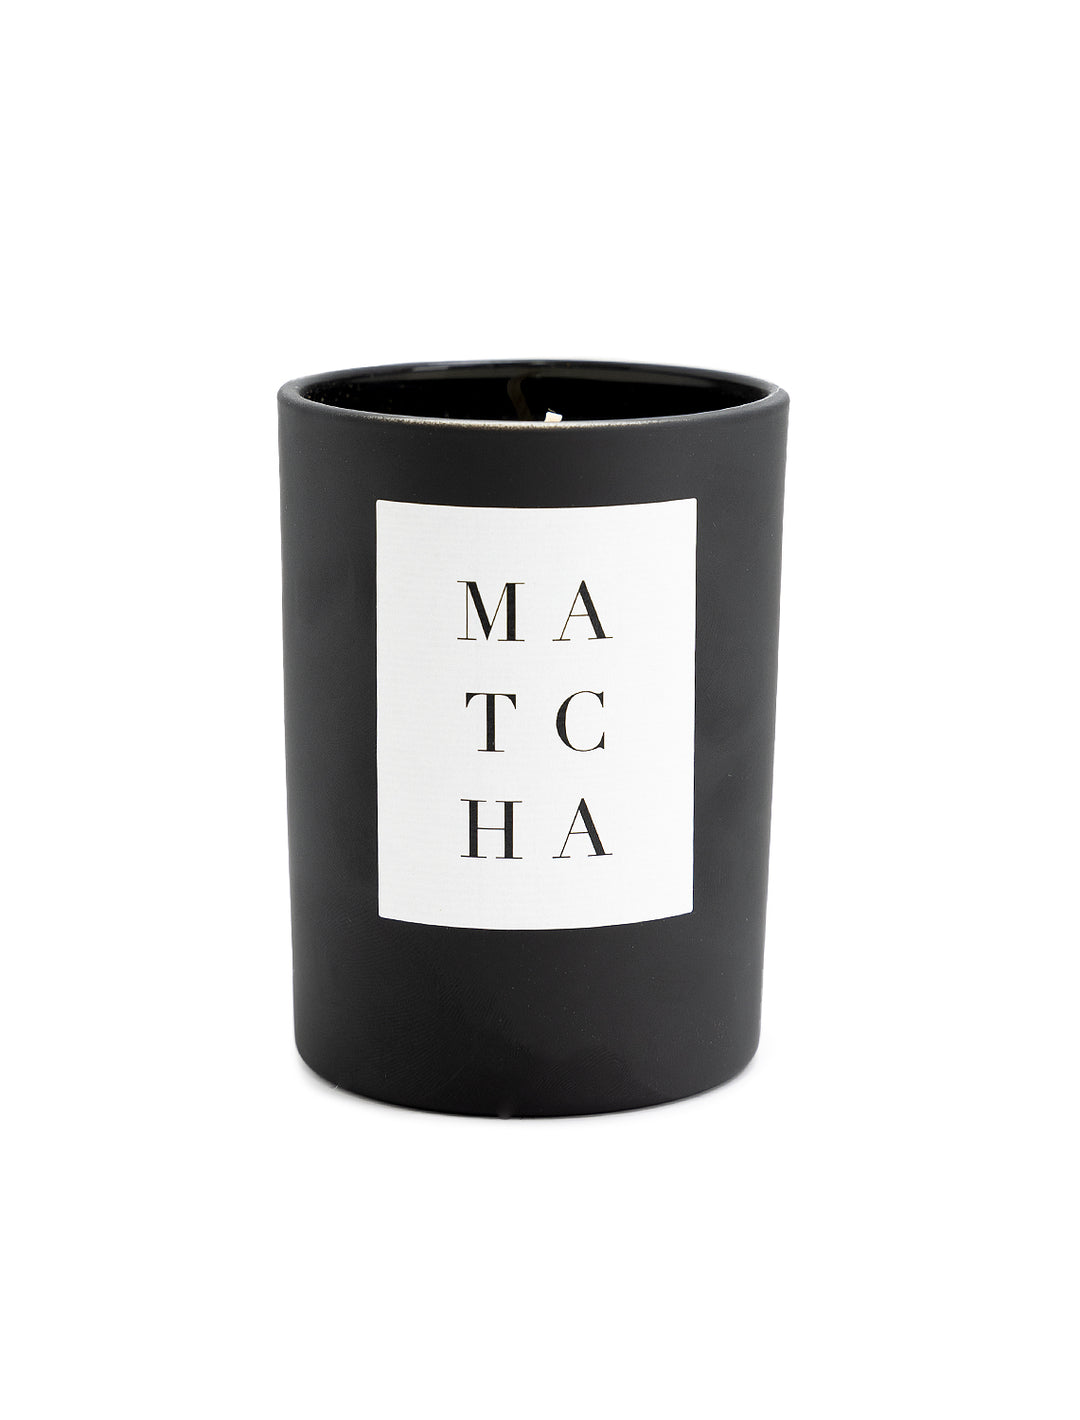 Front view of Brooklyn Candle Studio's NOIR matcha candle.